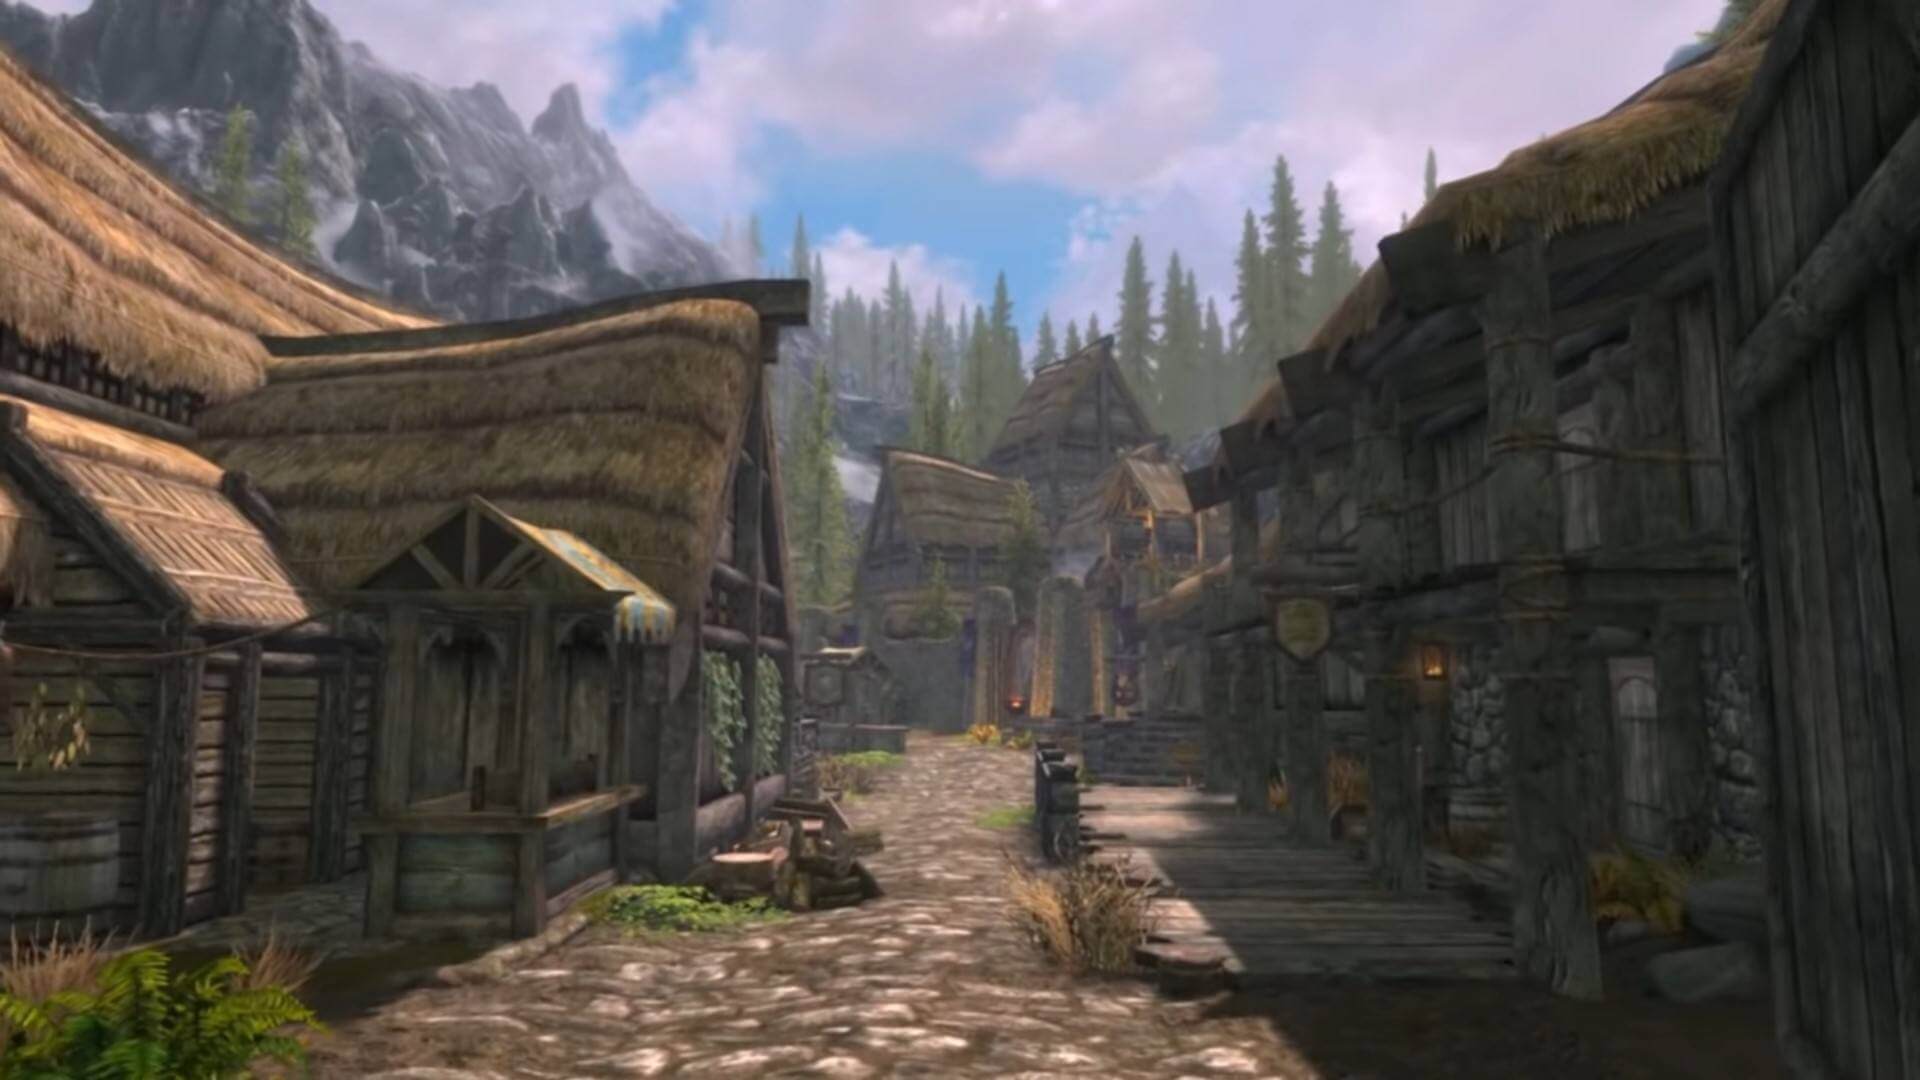 Great Cities Skyrim Special edition mod